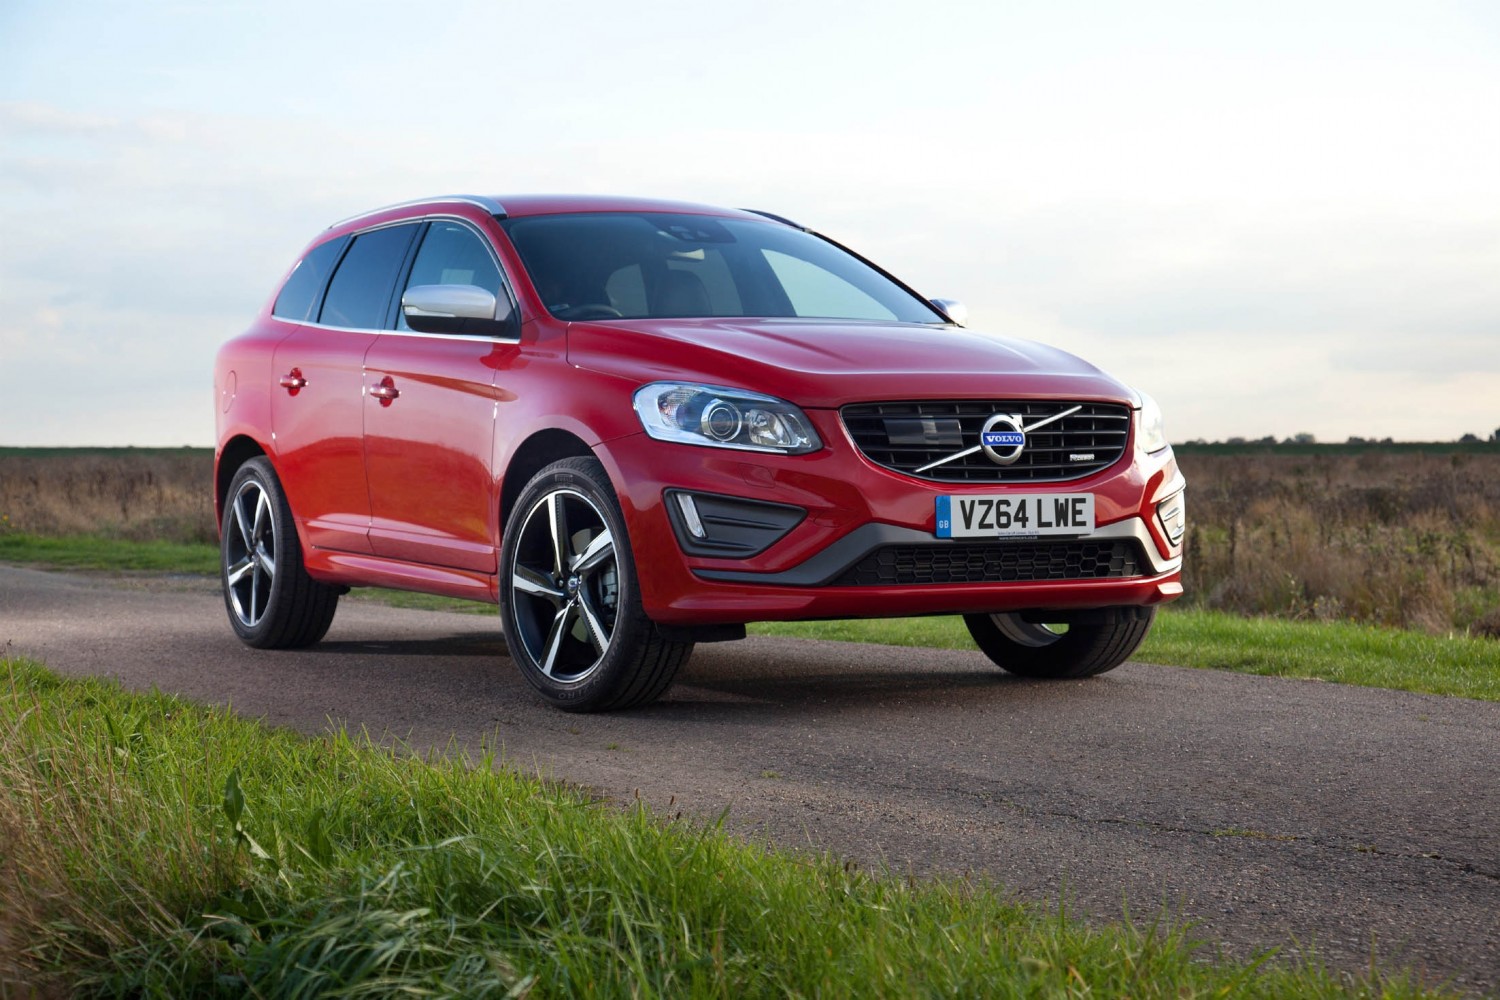 volvo xc60 used car review